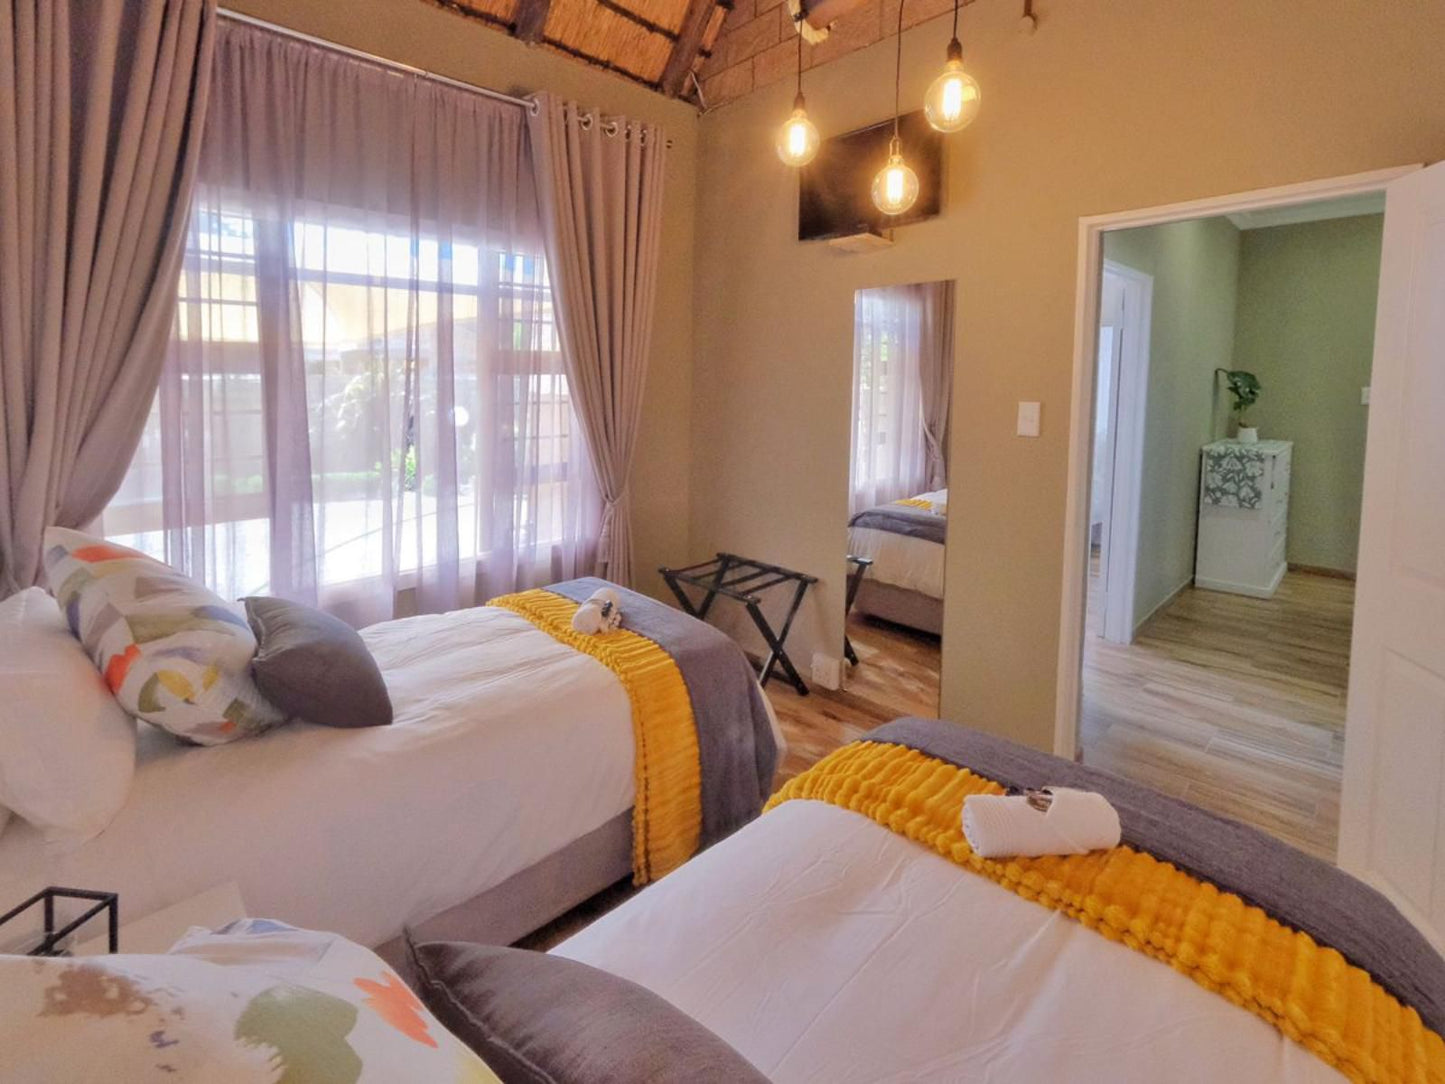 The Perfect Lodge Bethlehem Free State South Africa Bedroom